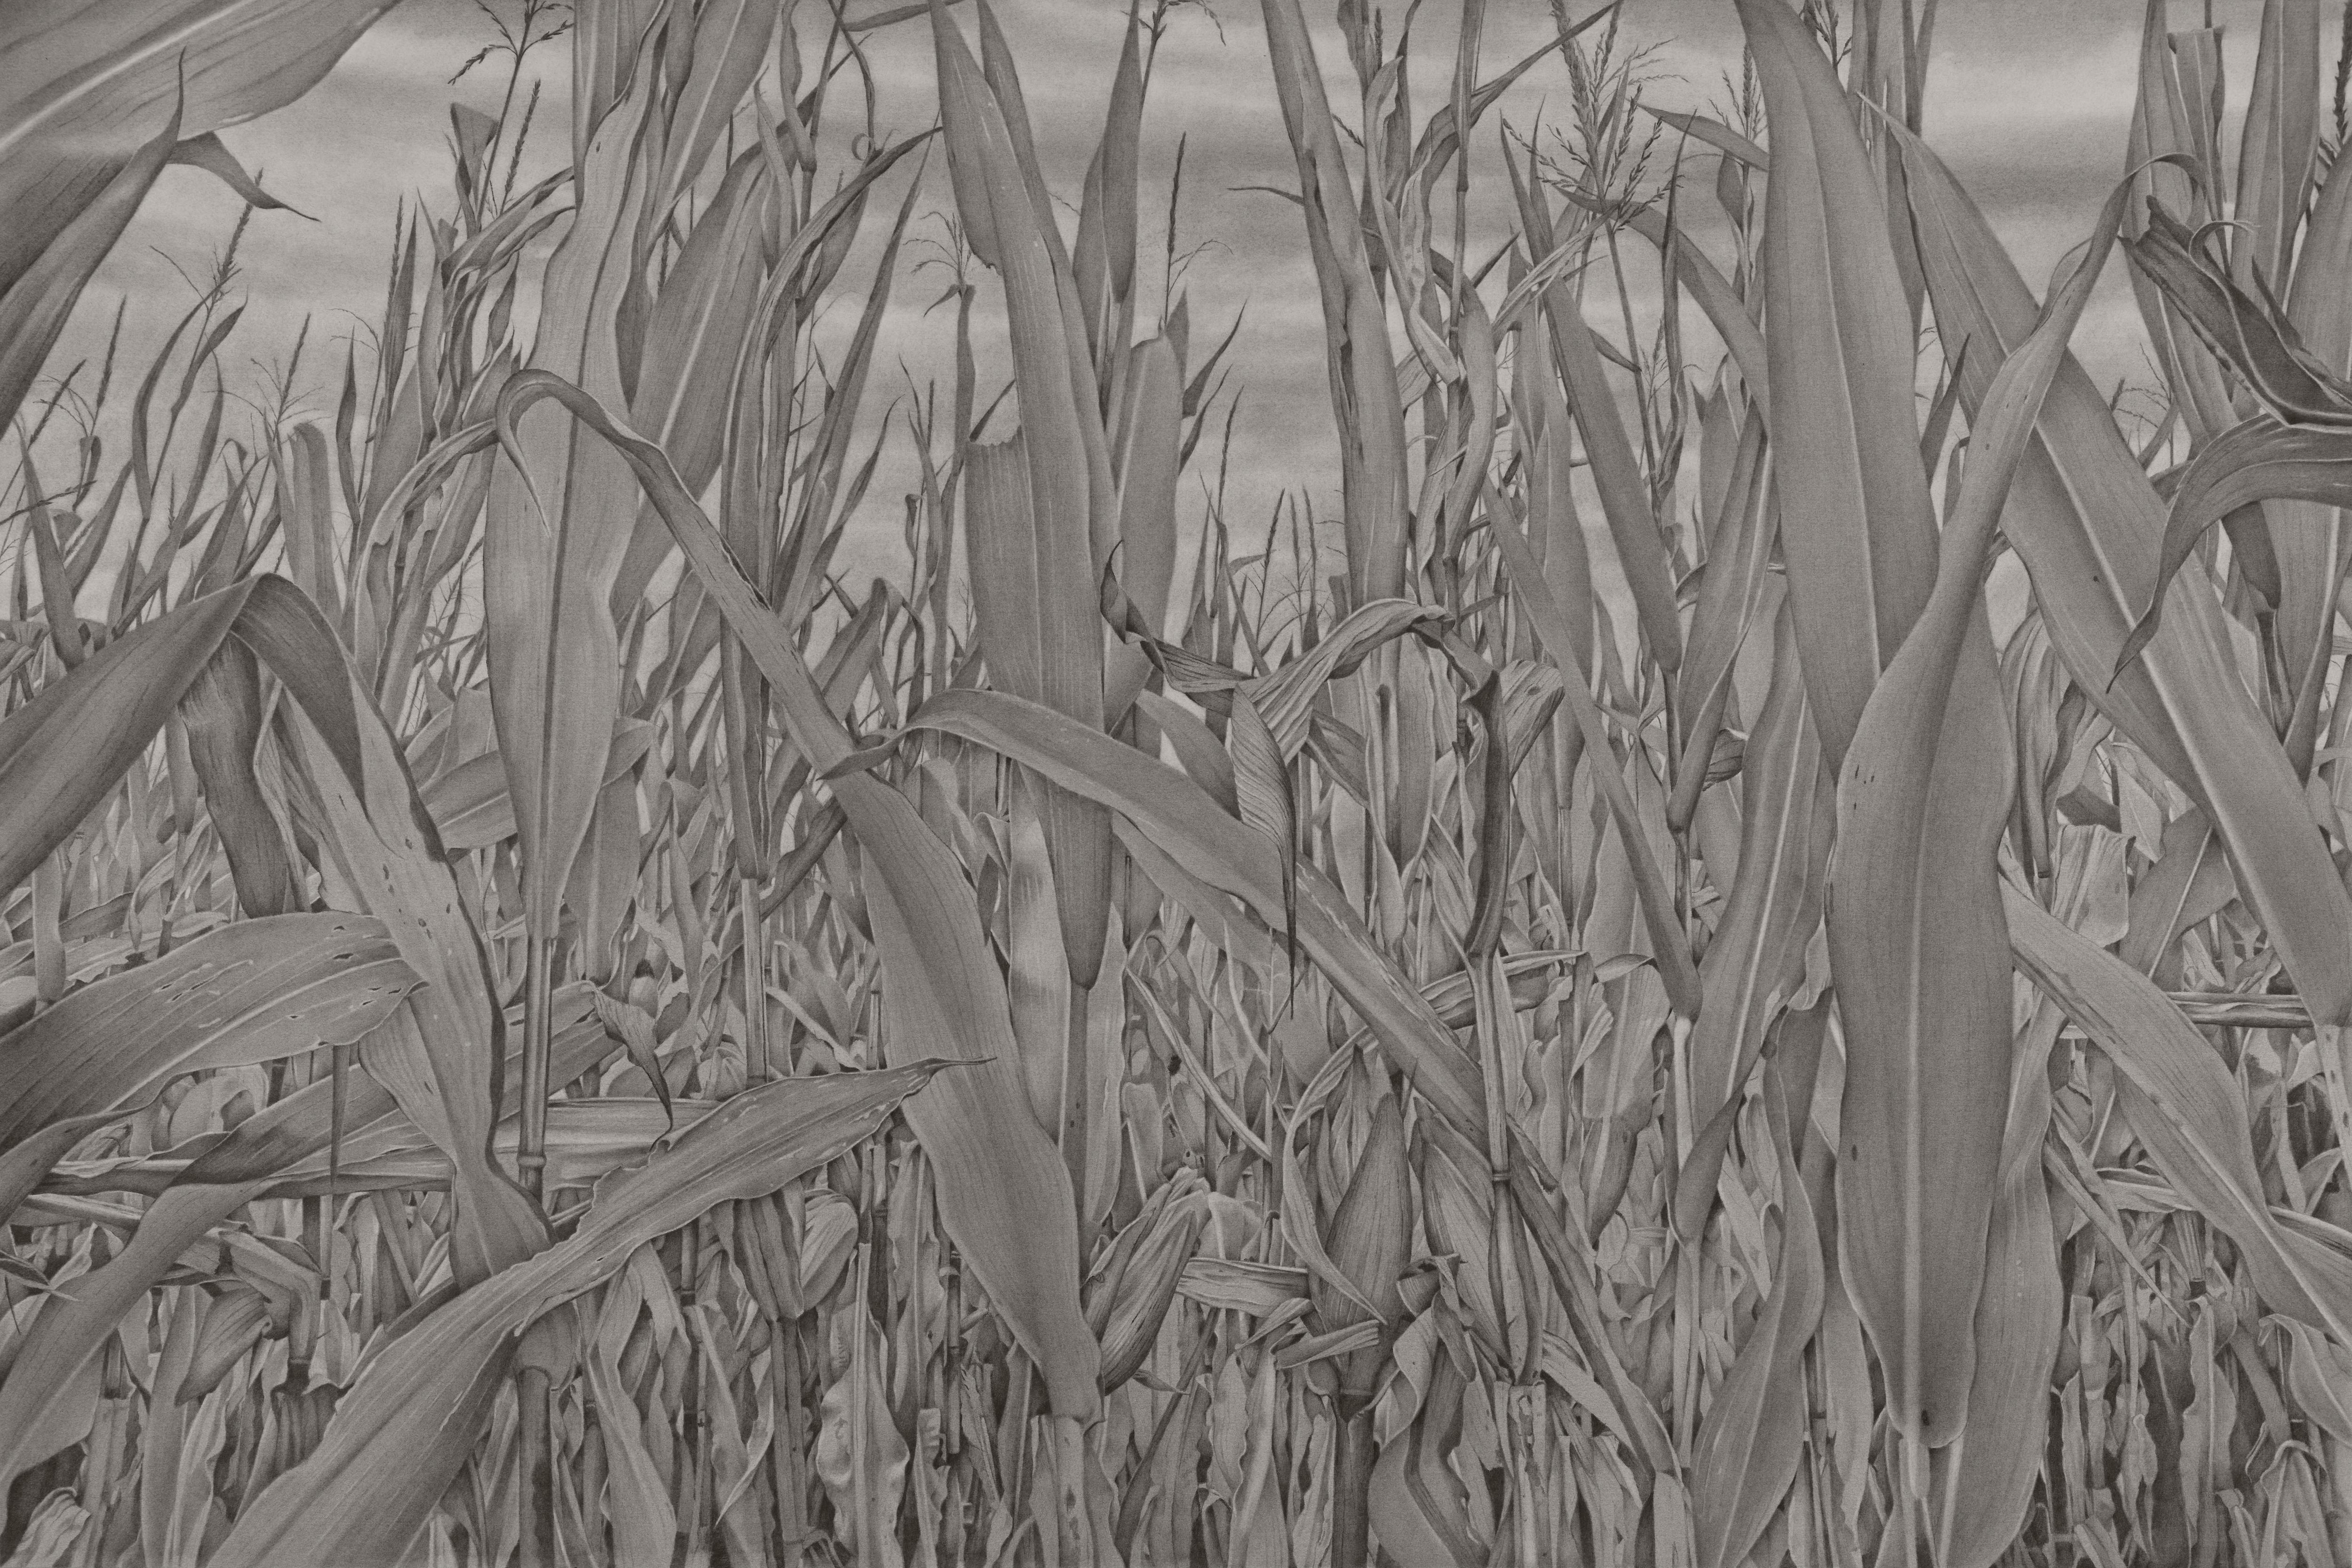 Mary Reilly Landscape Art - Corn Field 1, grey and white photorealist graphite landscape drawing, 2019